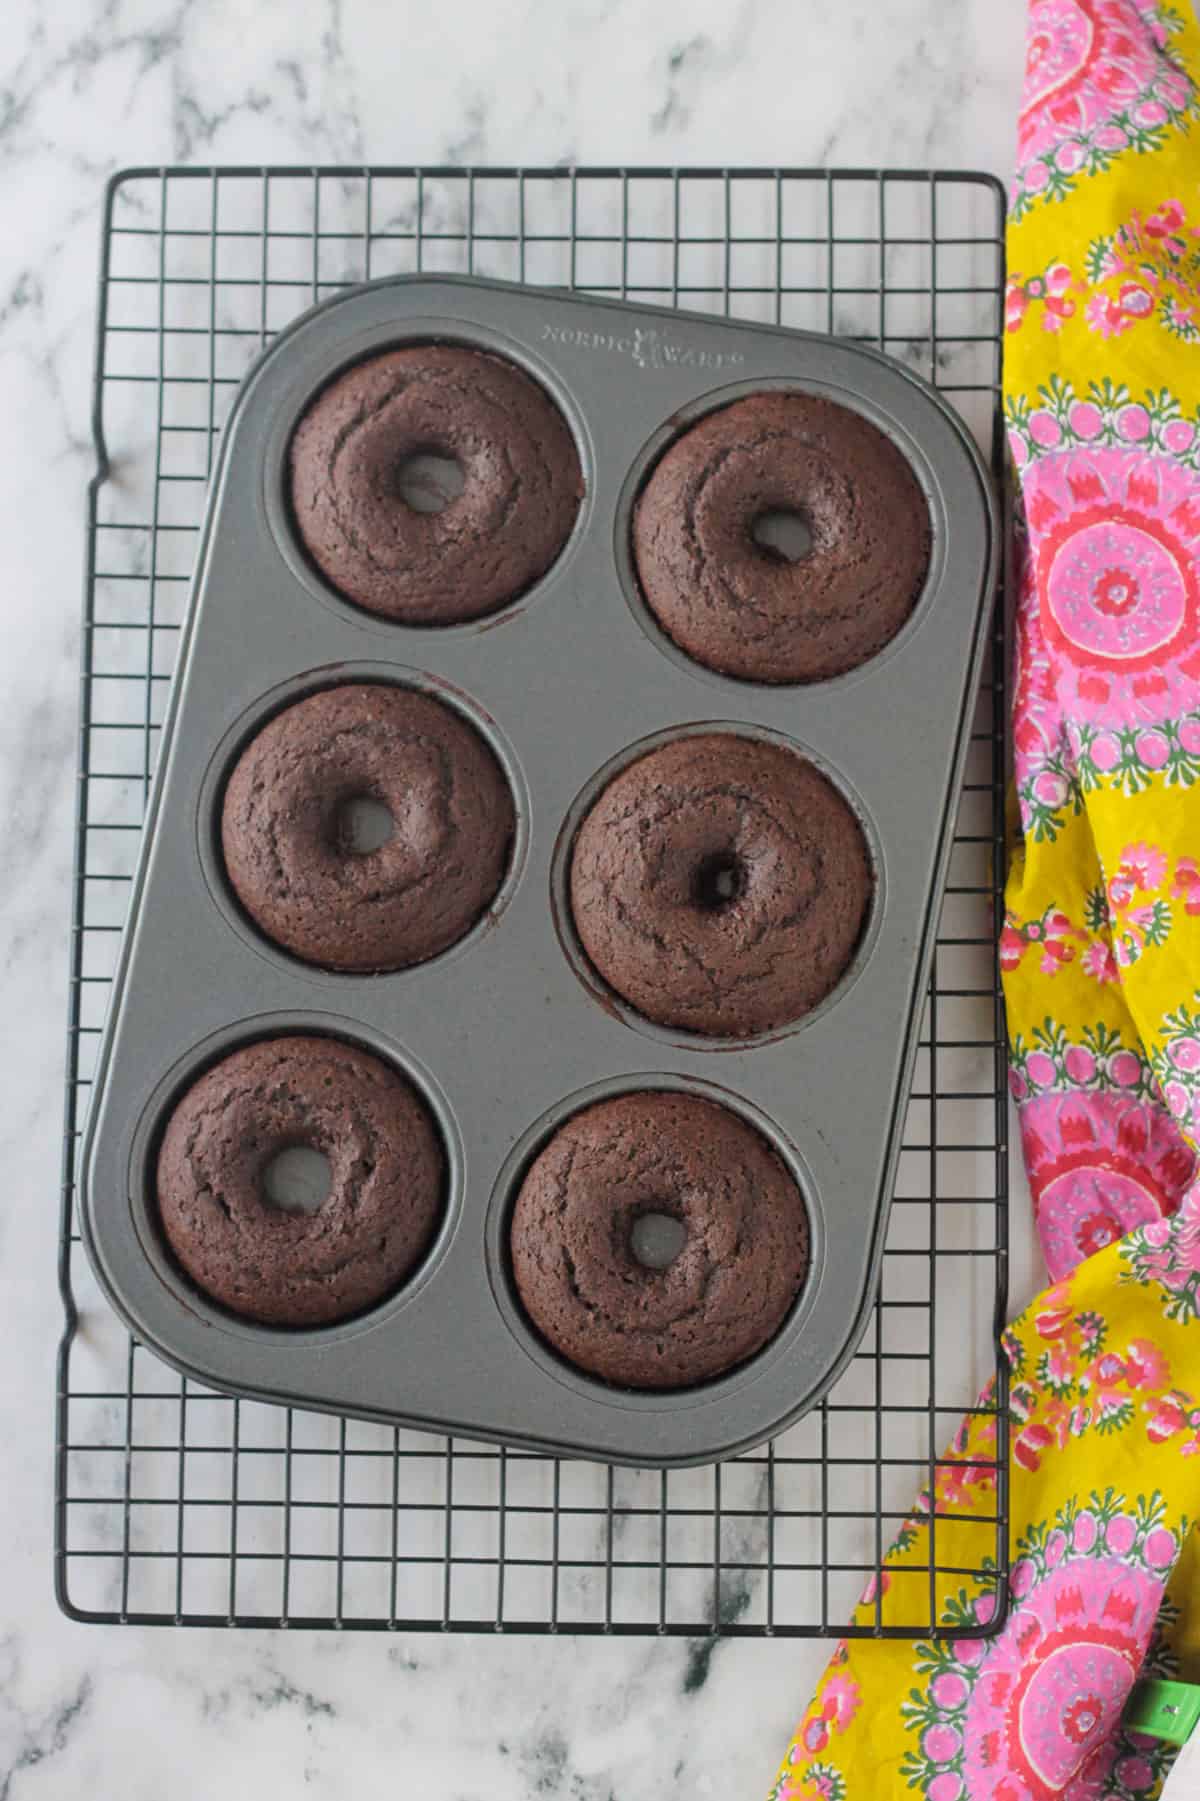 Finished donuts in a donut pan on a cooling rack.